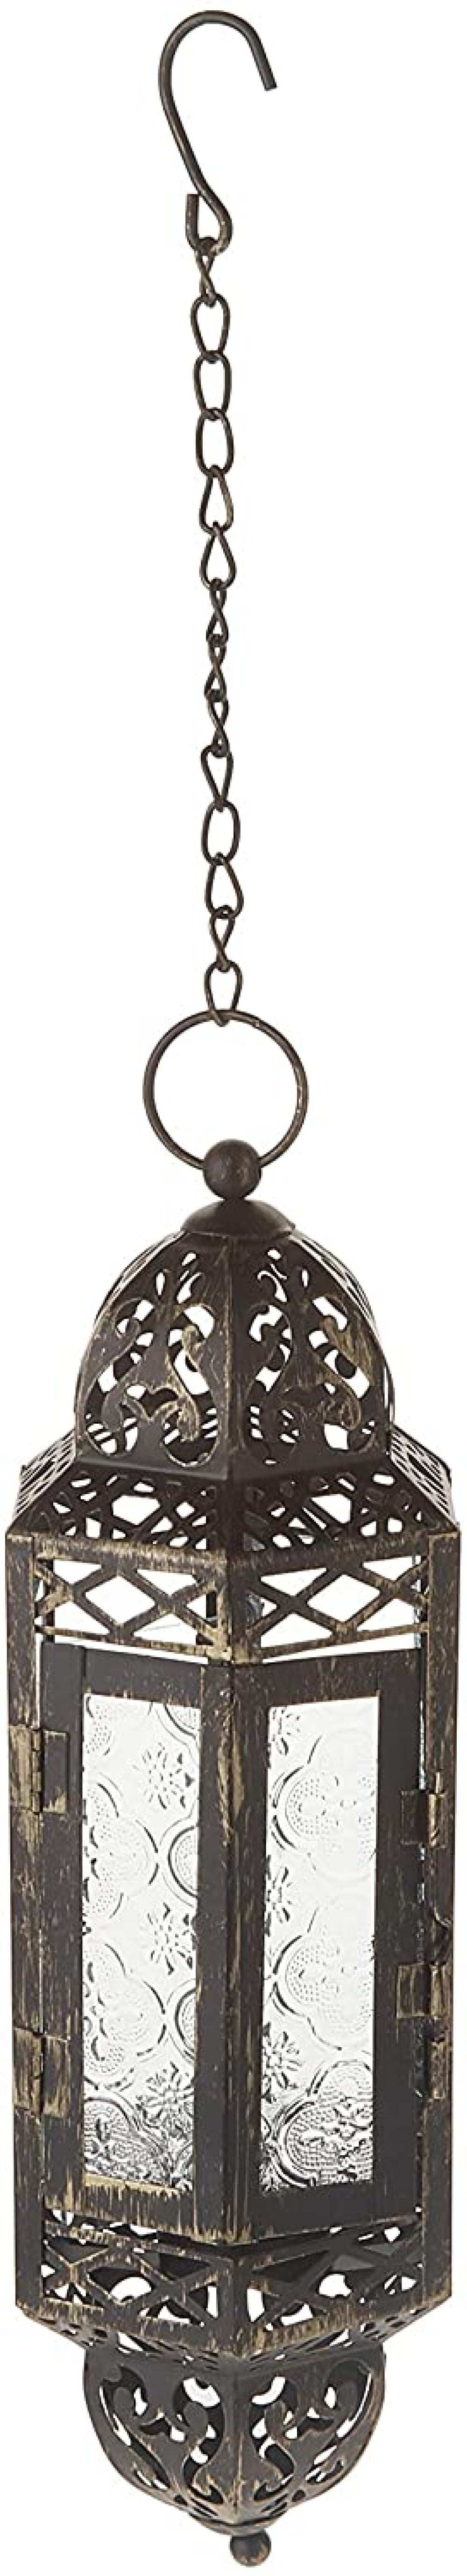 Lantern Metal & Glass Round Handle in Antique Gold Finish with Filigree Accents 